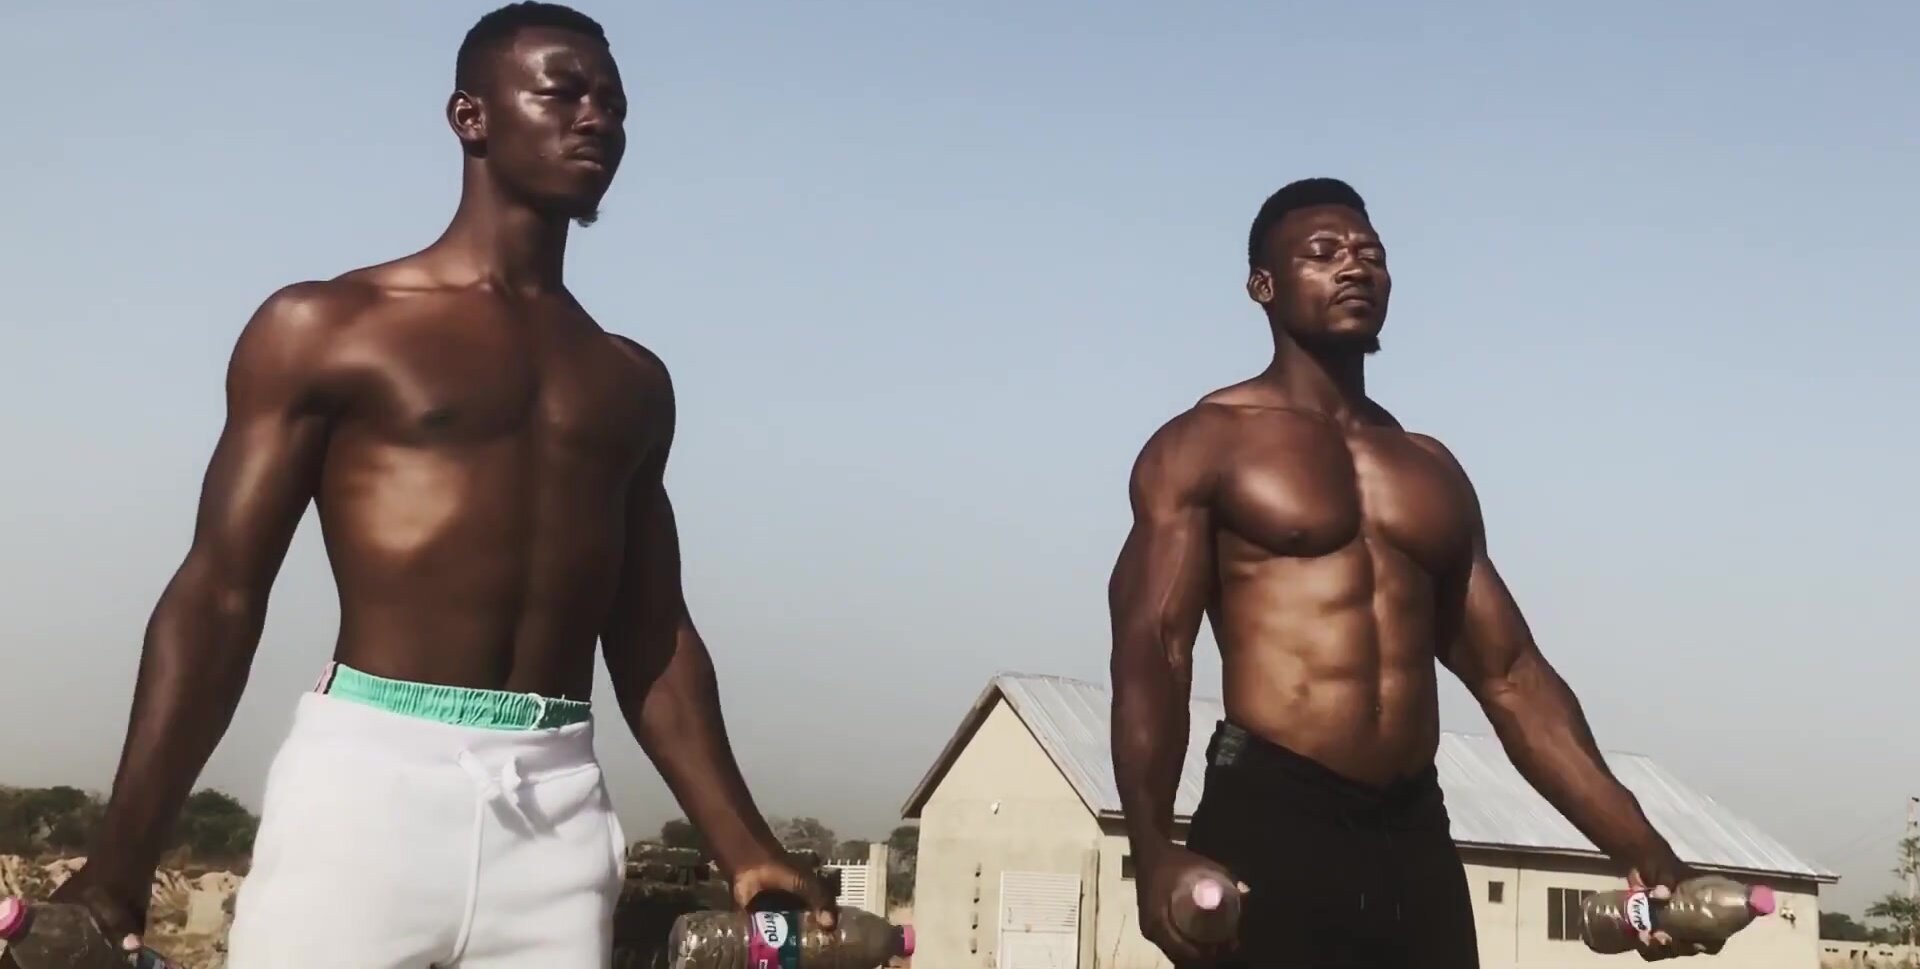 Pure african muscles - video 2